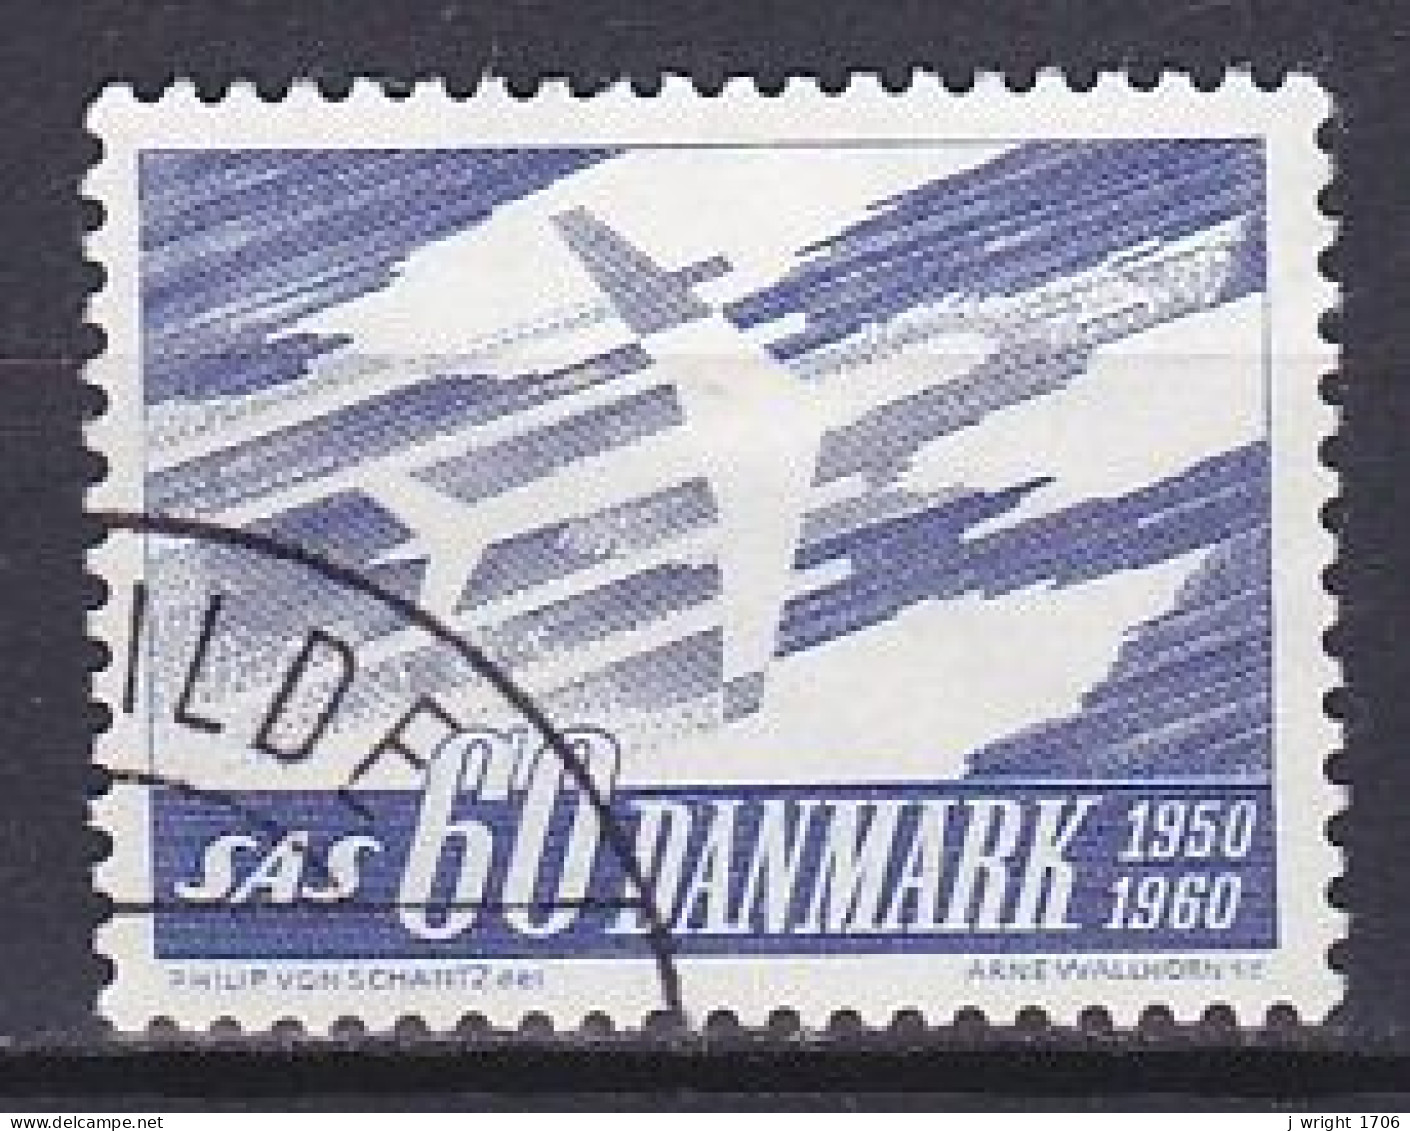 Denmark, 1961, SAS 10th Anniv, 60ø/Fluorescent, USED - Used Stamps